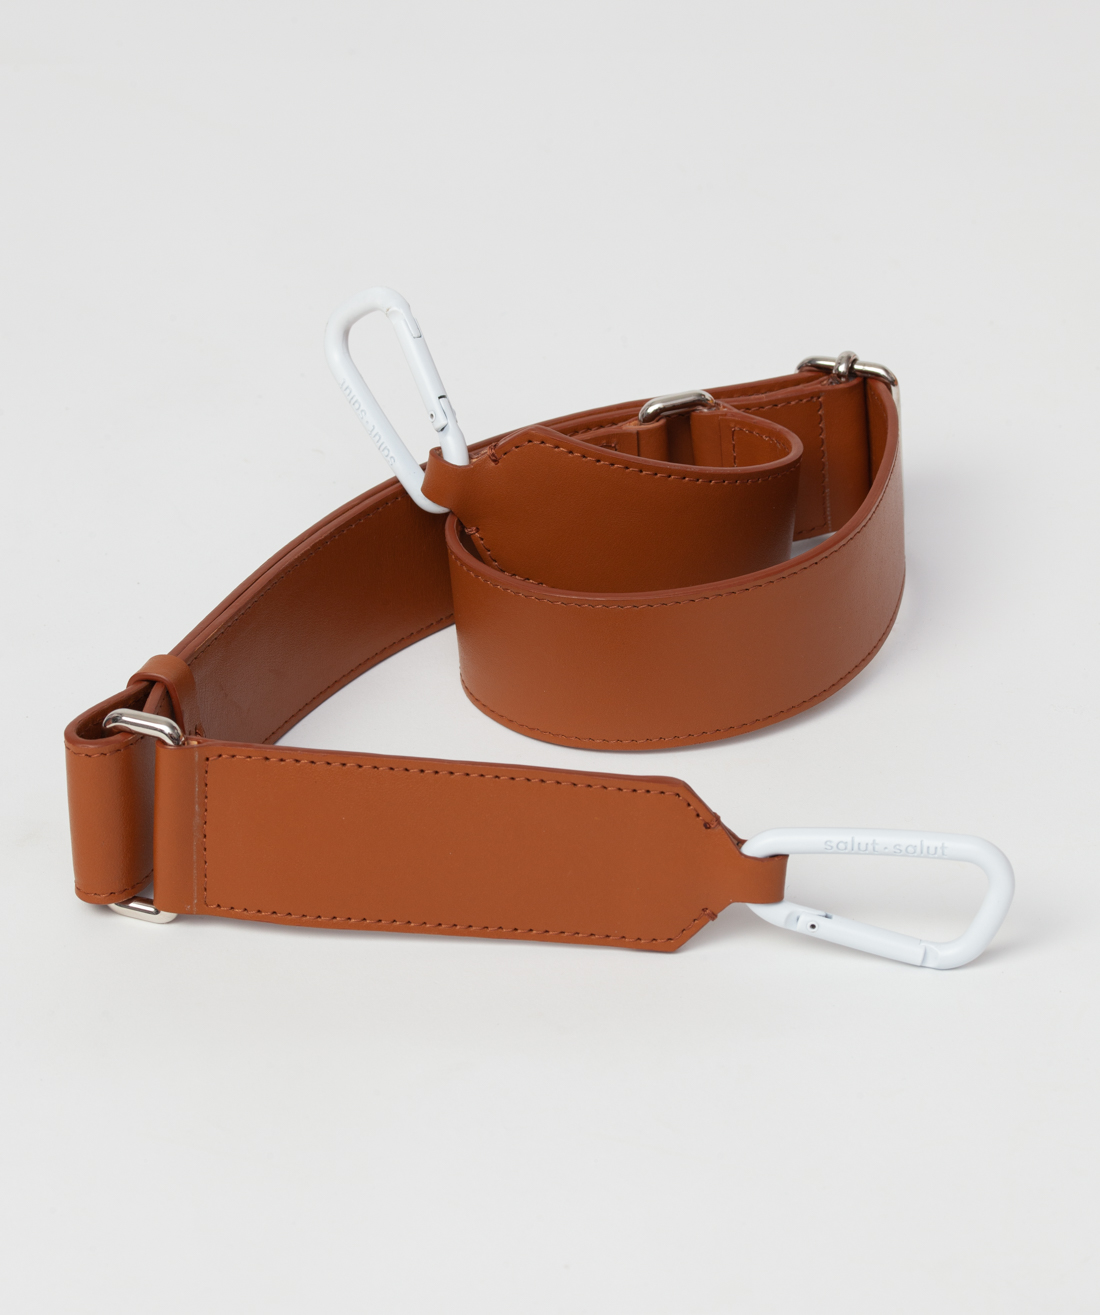 Wide leather strap - CAMEL LEATHER